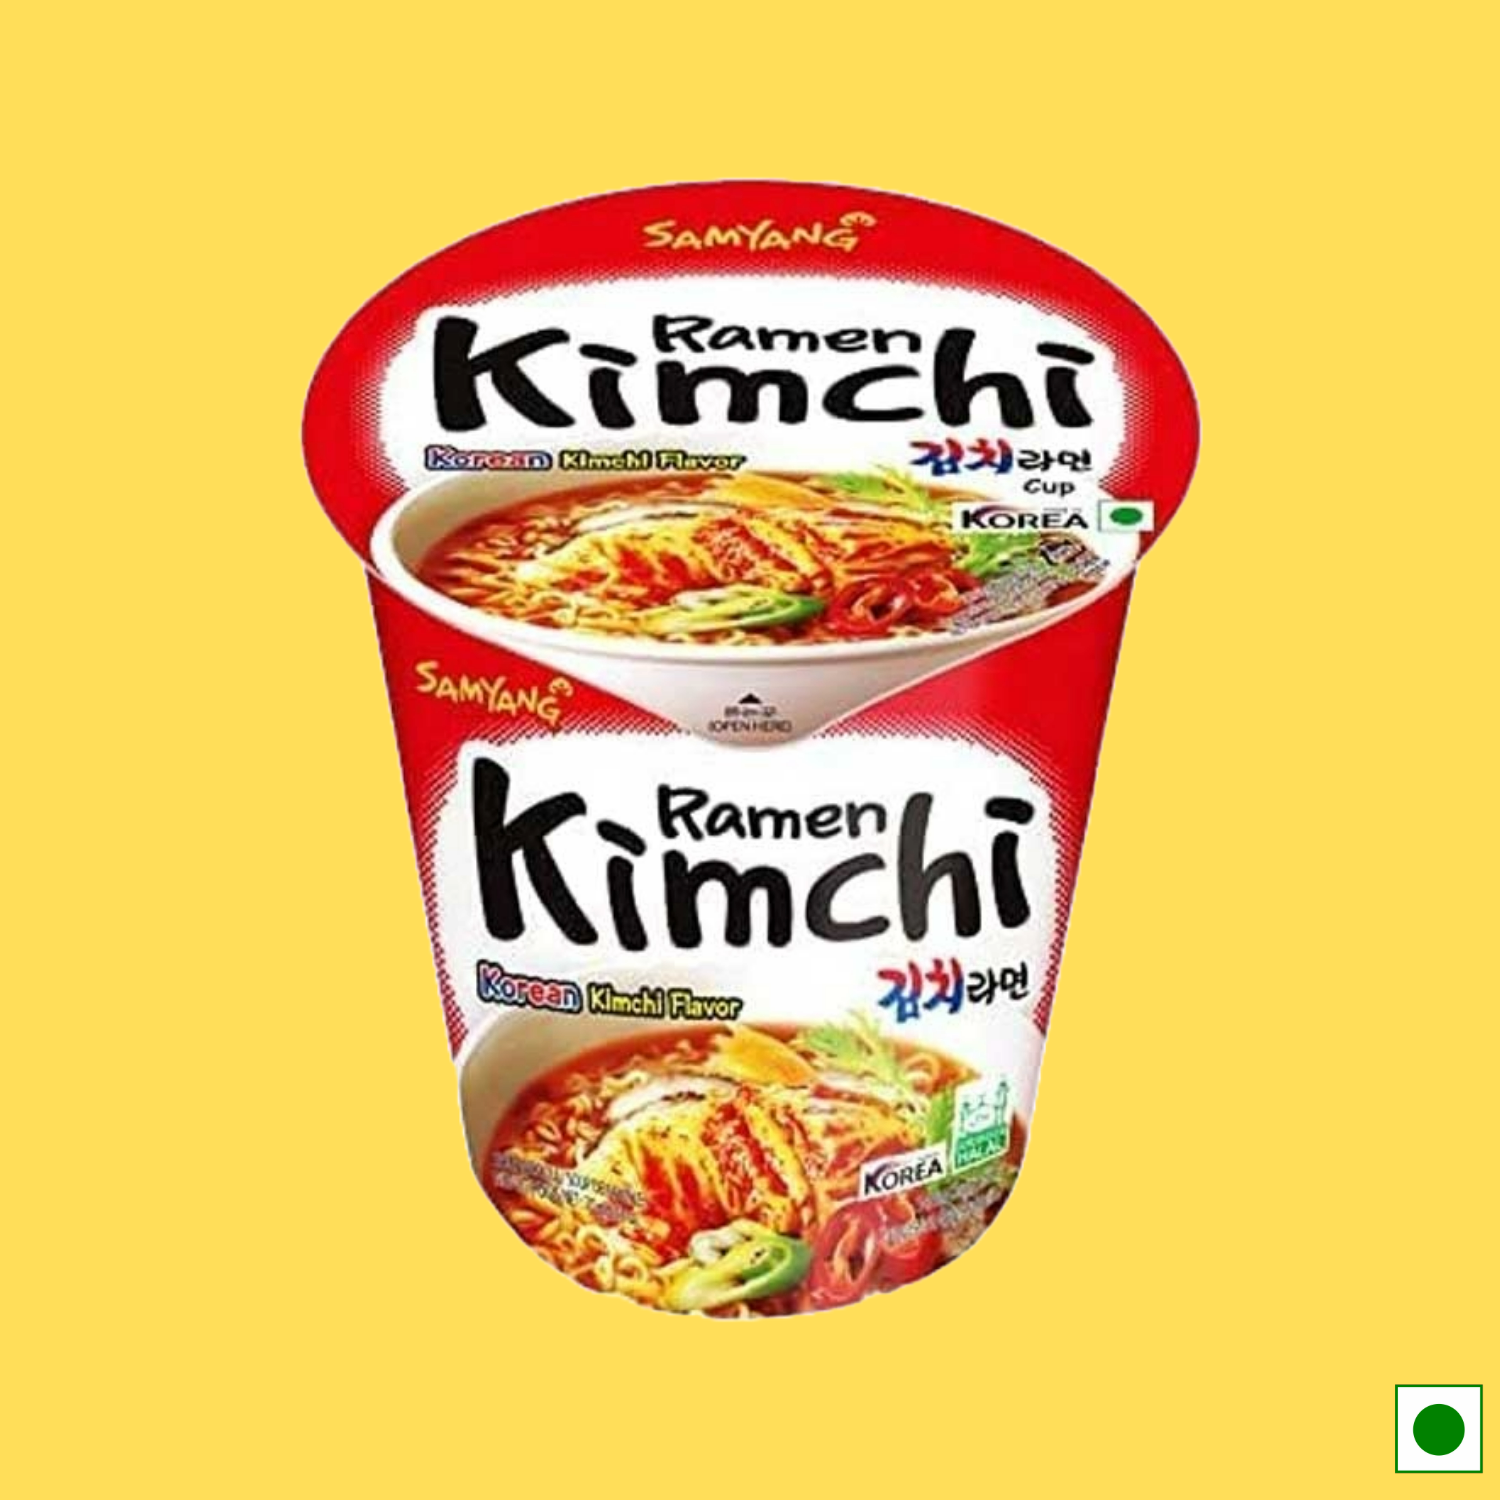 Samyang Ramen Kimchi Flavour Cup, 70g (Imported)